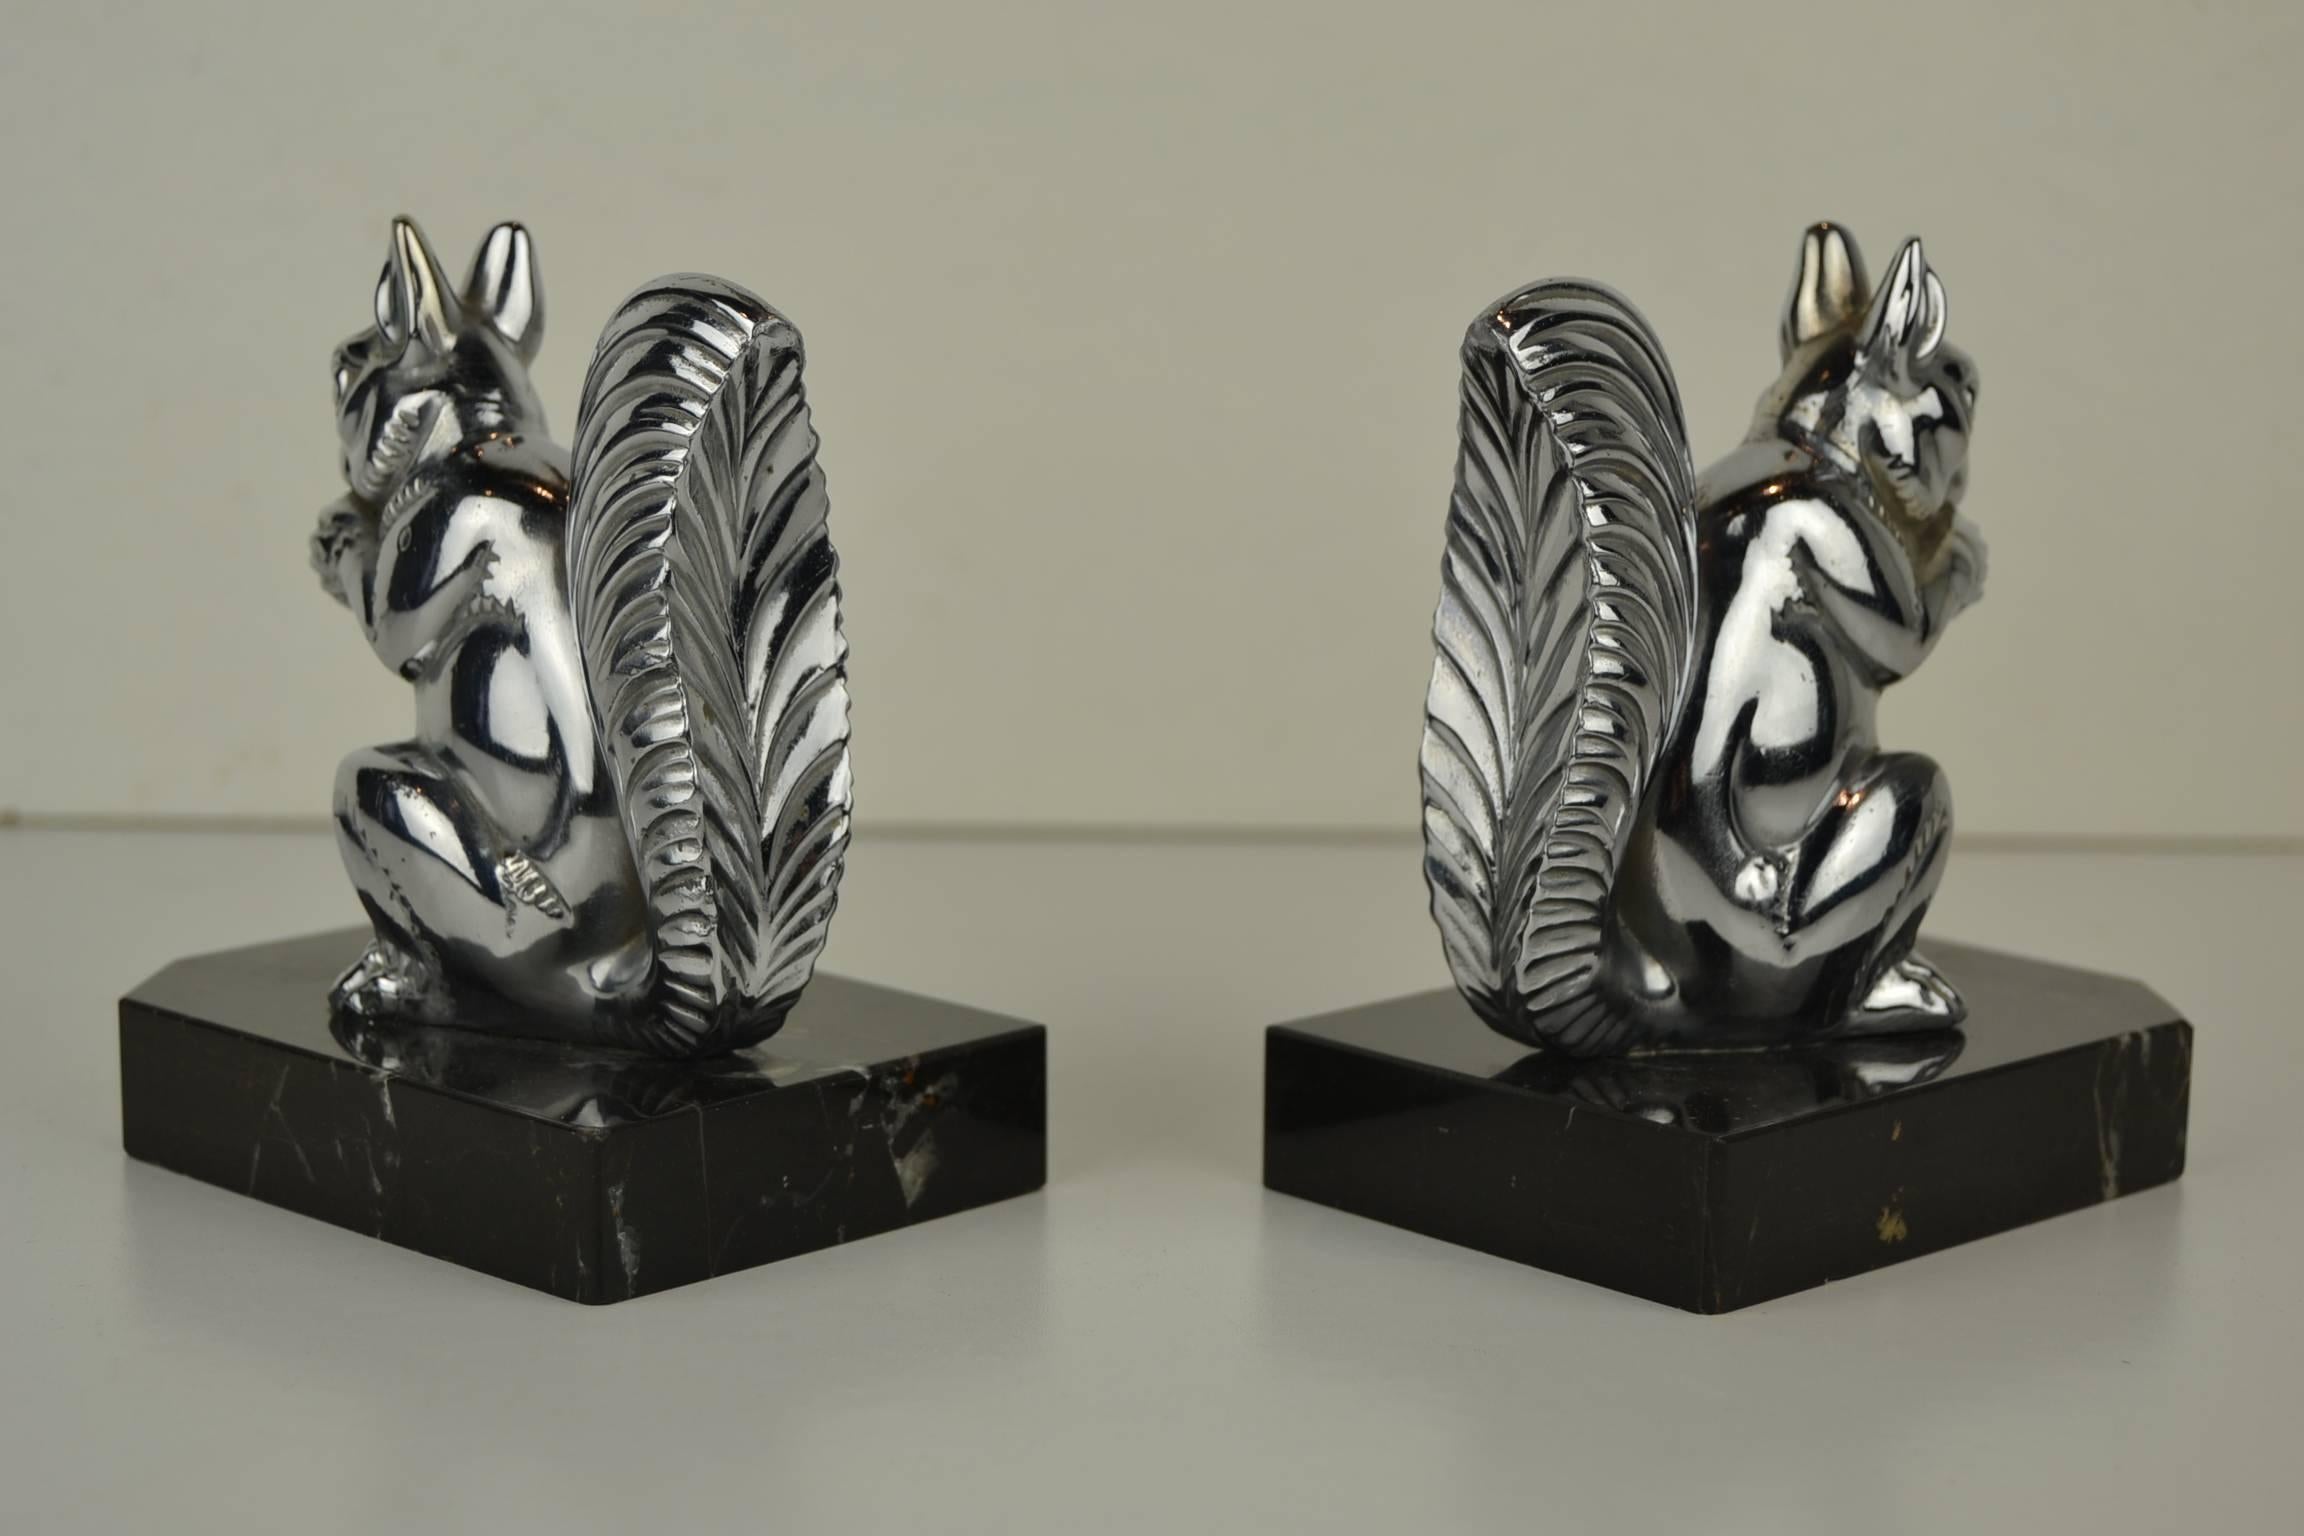 European Chromed Squirrel Bookends on Marble Bases, Art Deco, 1930s